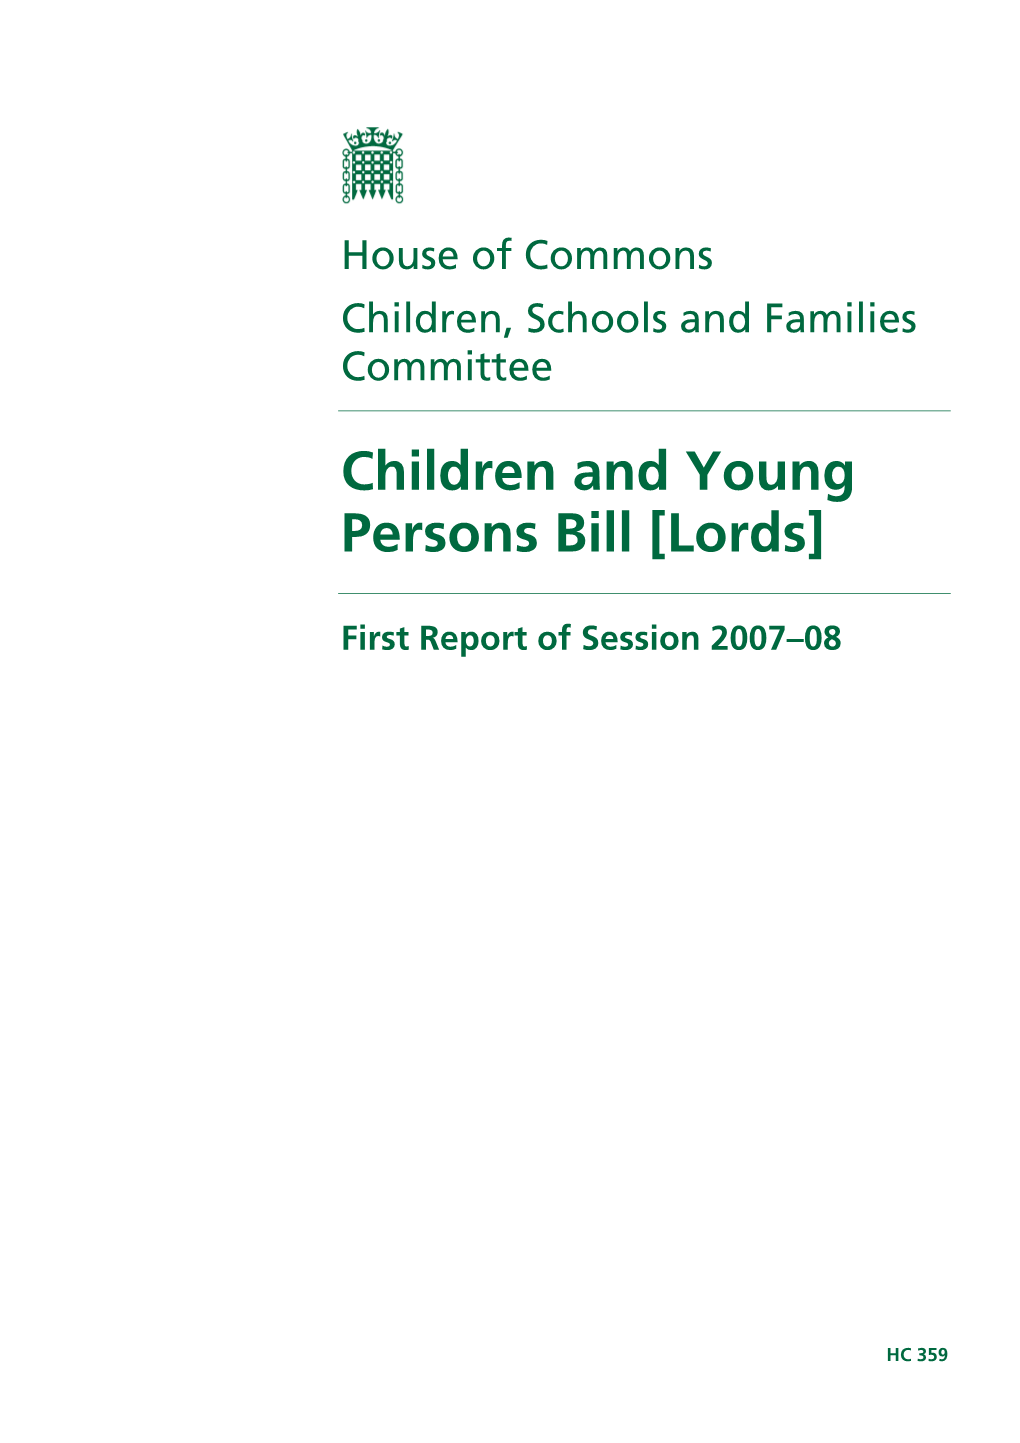 Children and Young Persons Bill [Lords]